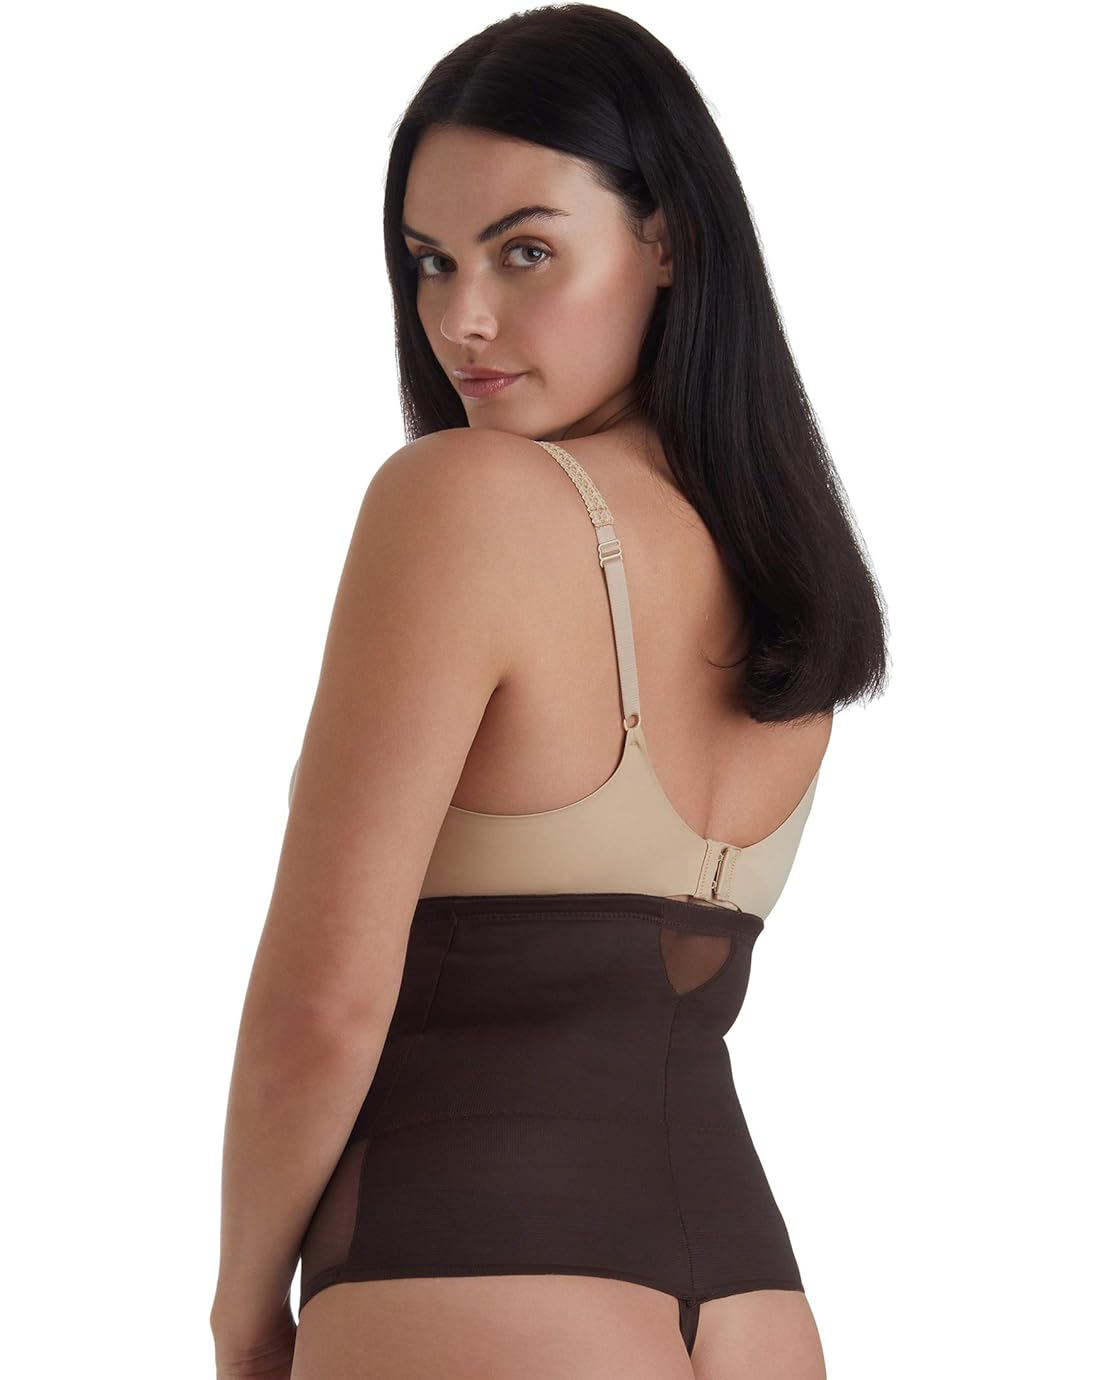  Miraclesuit Shapewear Sheer Extra Firm Shaping High Waist Thong